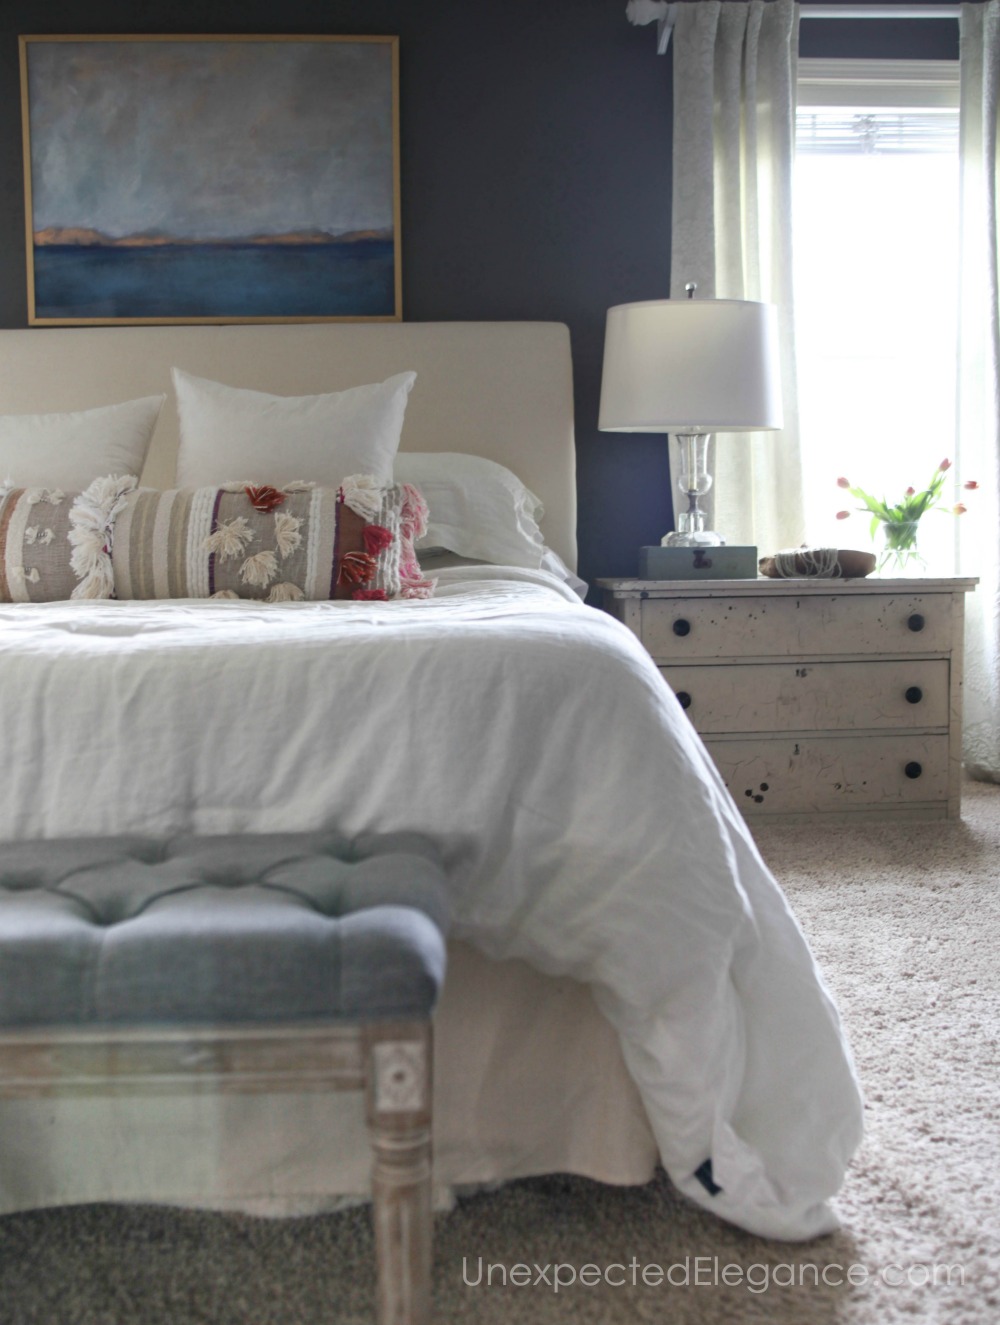 Check out this master bedroom refresh! By using things you already have and cleaning out the clutter, you can have a new space without spending any money!